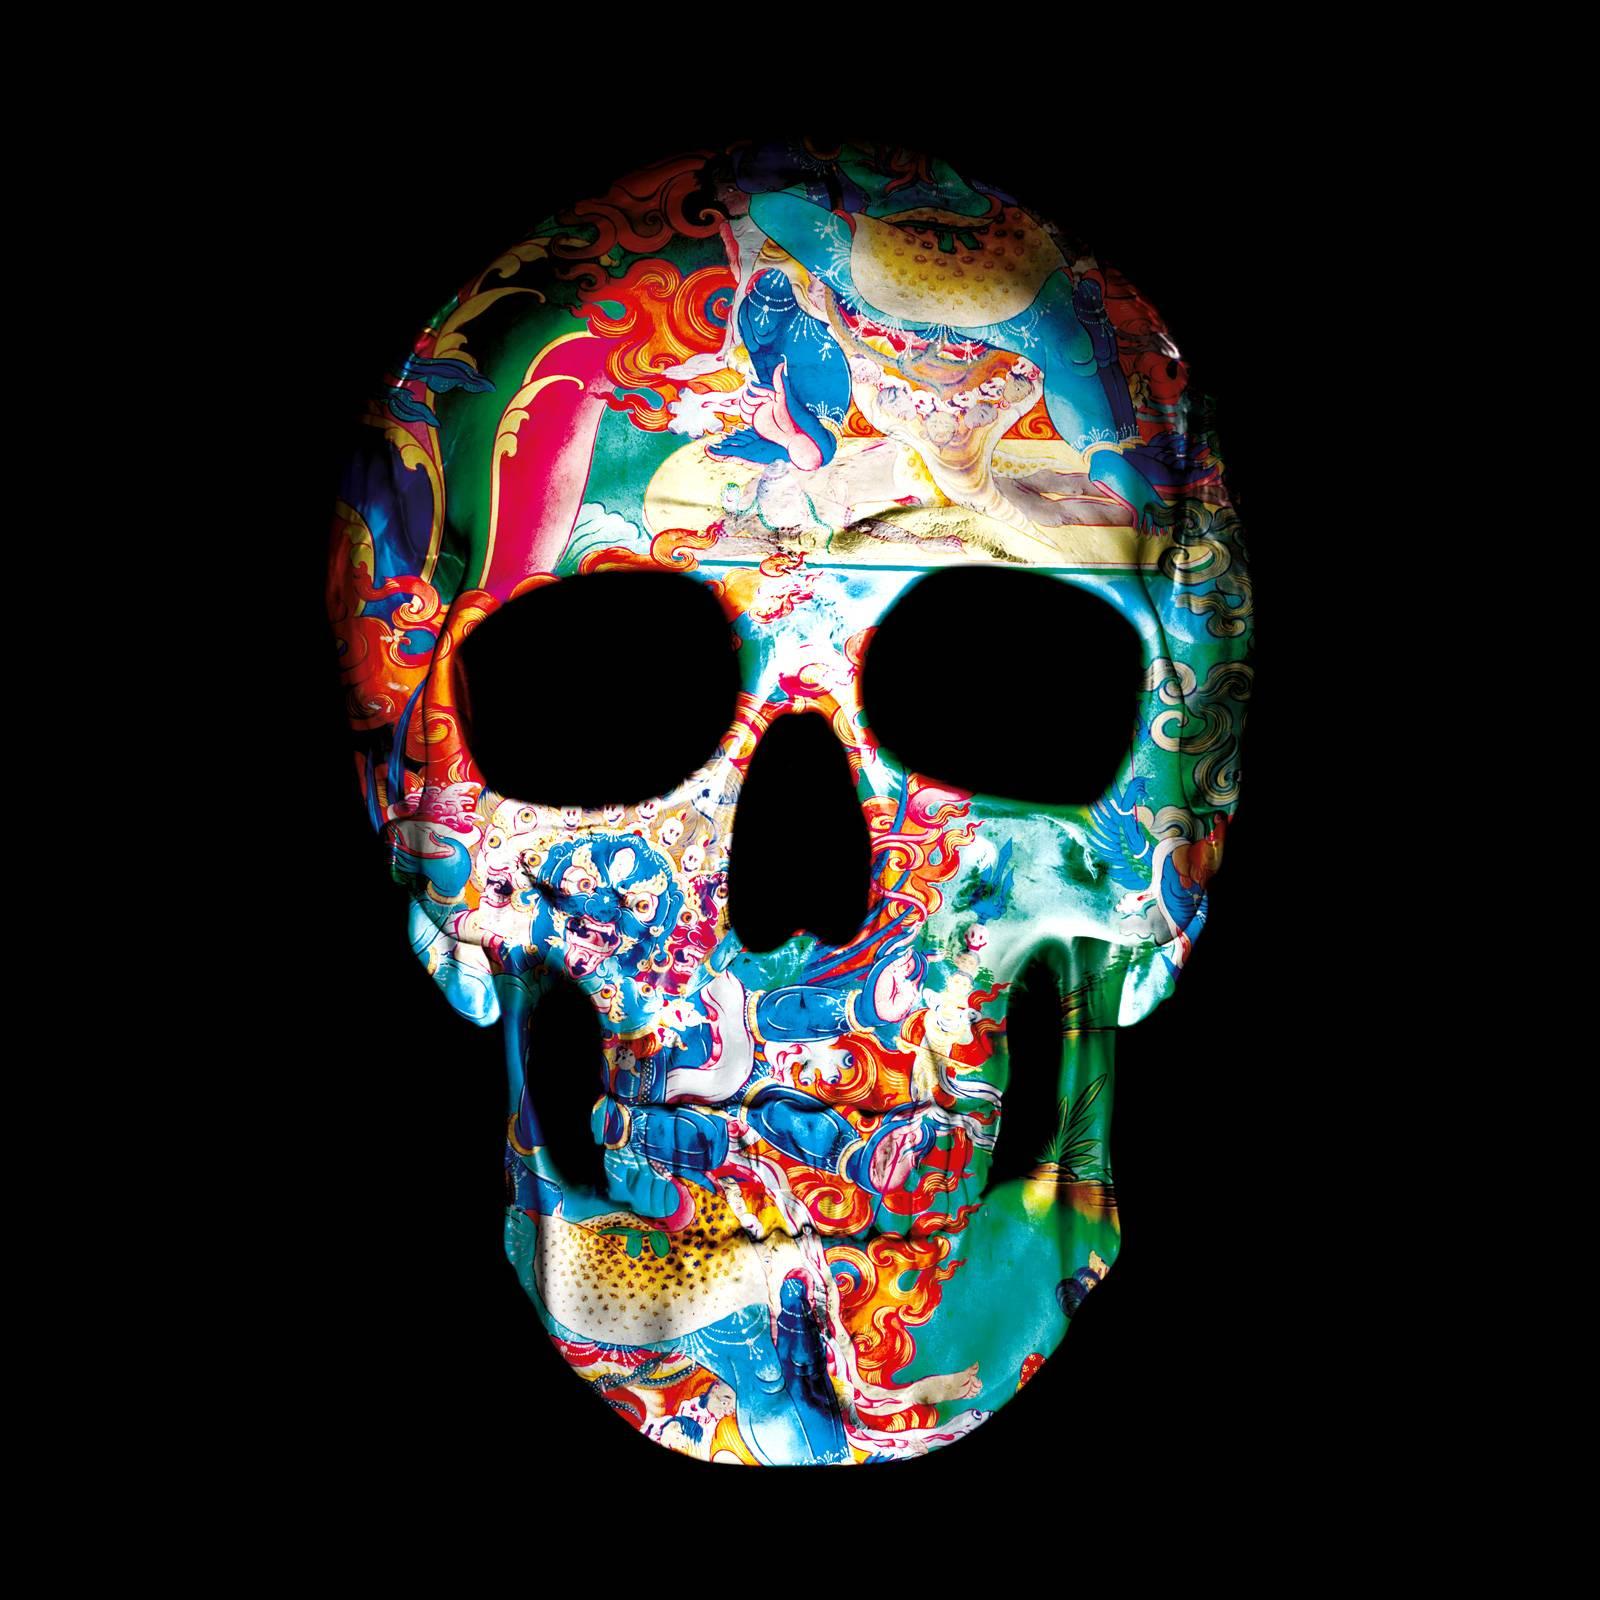 Thomas Bijen Figurative Photograph - 9 Dimensions of the Skull II  - Framed Fine Art Limited Edition of 149